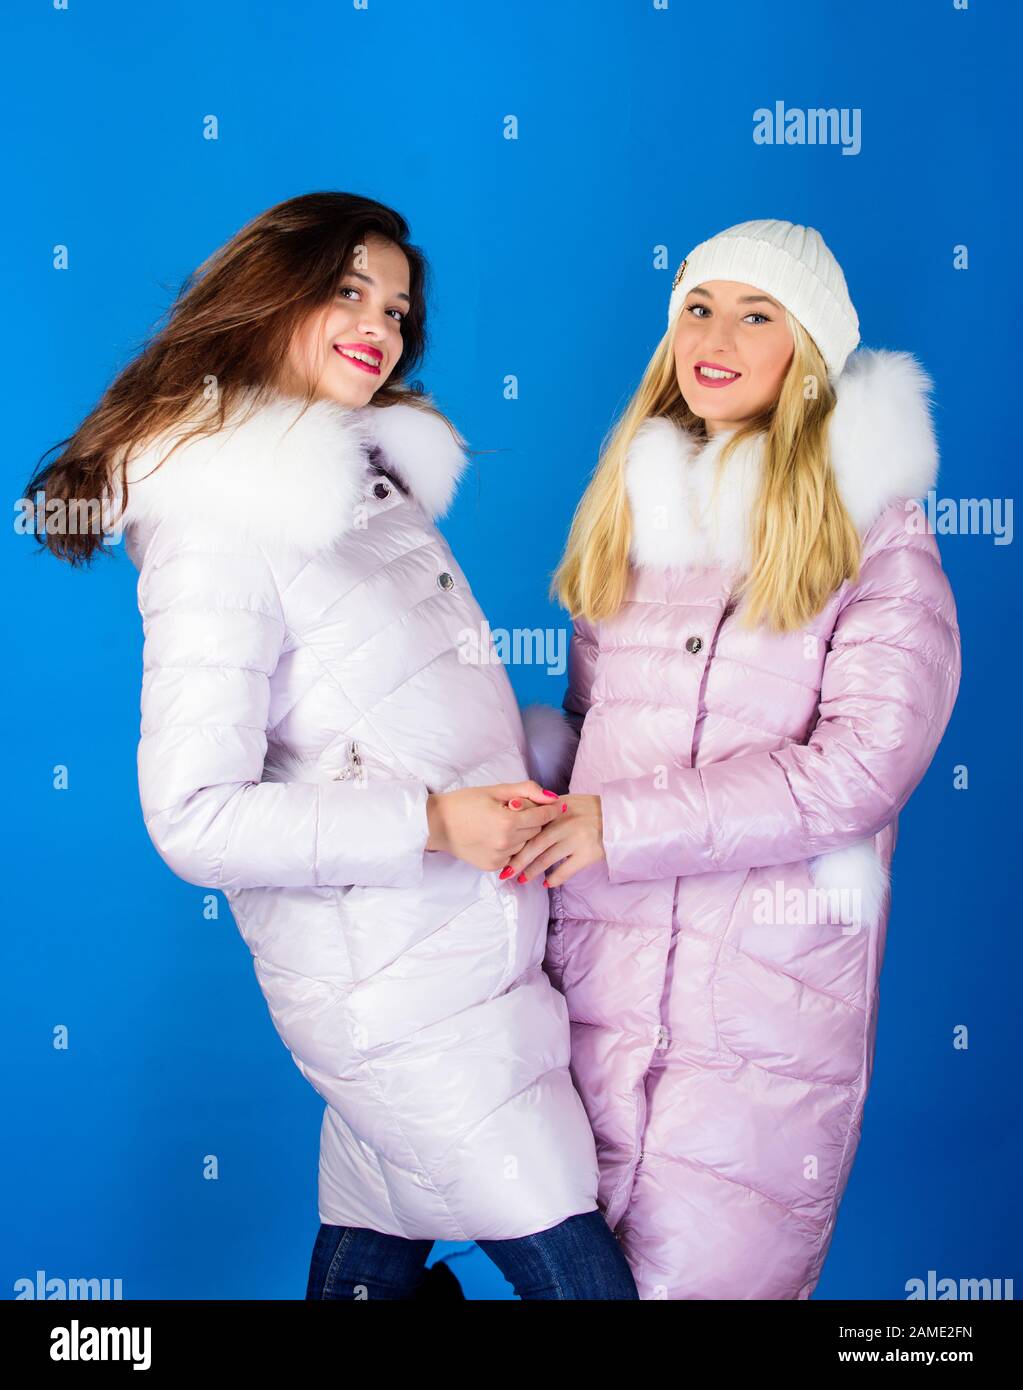 https://c8.alamy.com/comp/2AME2FN/fashion-friends-winter-season-soft-fur-for-those-wishing-stay-modern-winter-clothes-women-wear-down-jacket-with-furry-hood-girls-smiling-makeup-faces-wear-winter-jackets-blue-background-2AME2FN.jpg